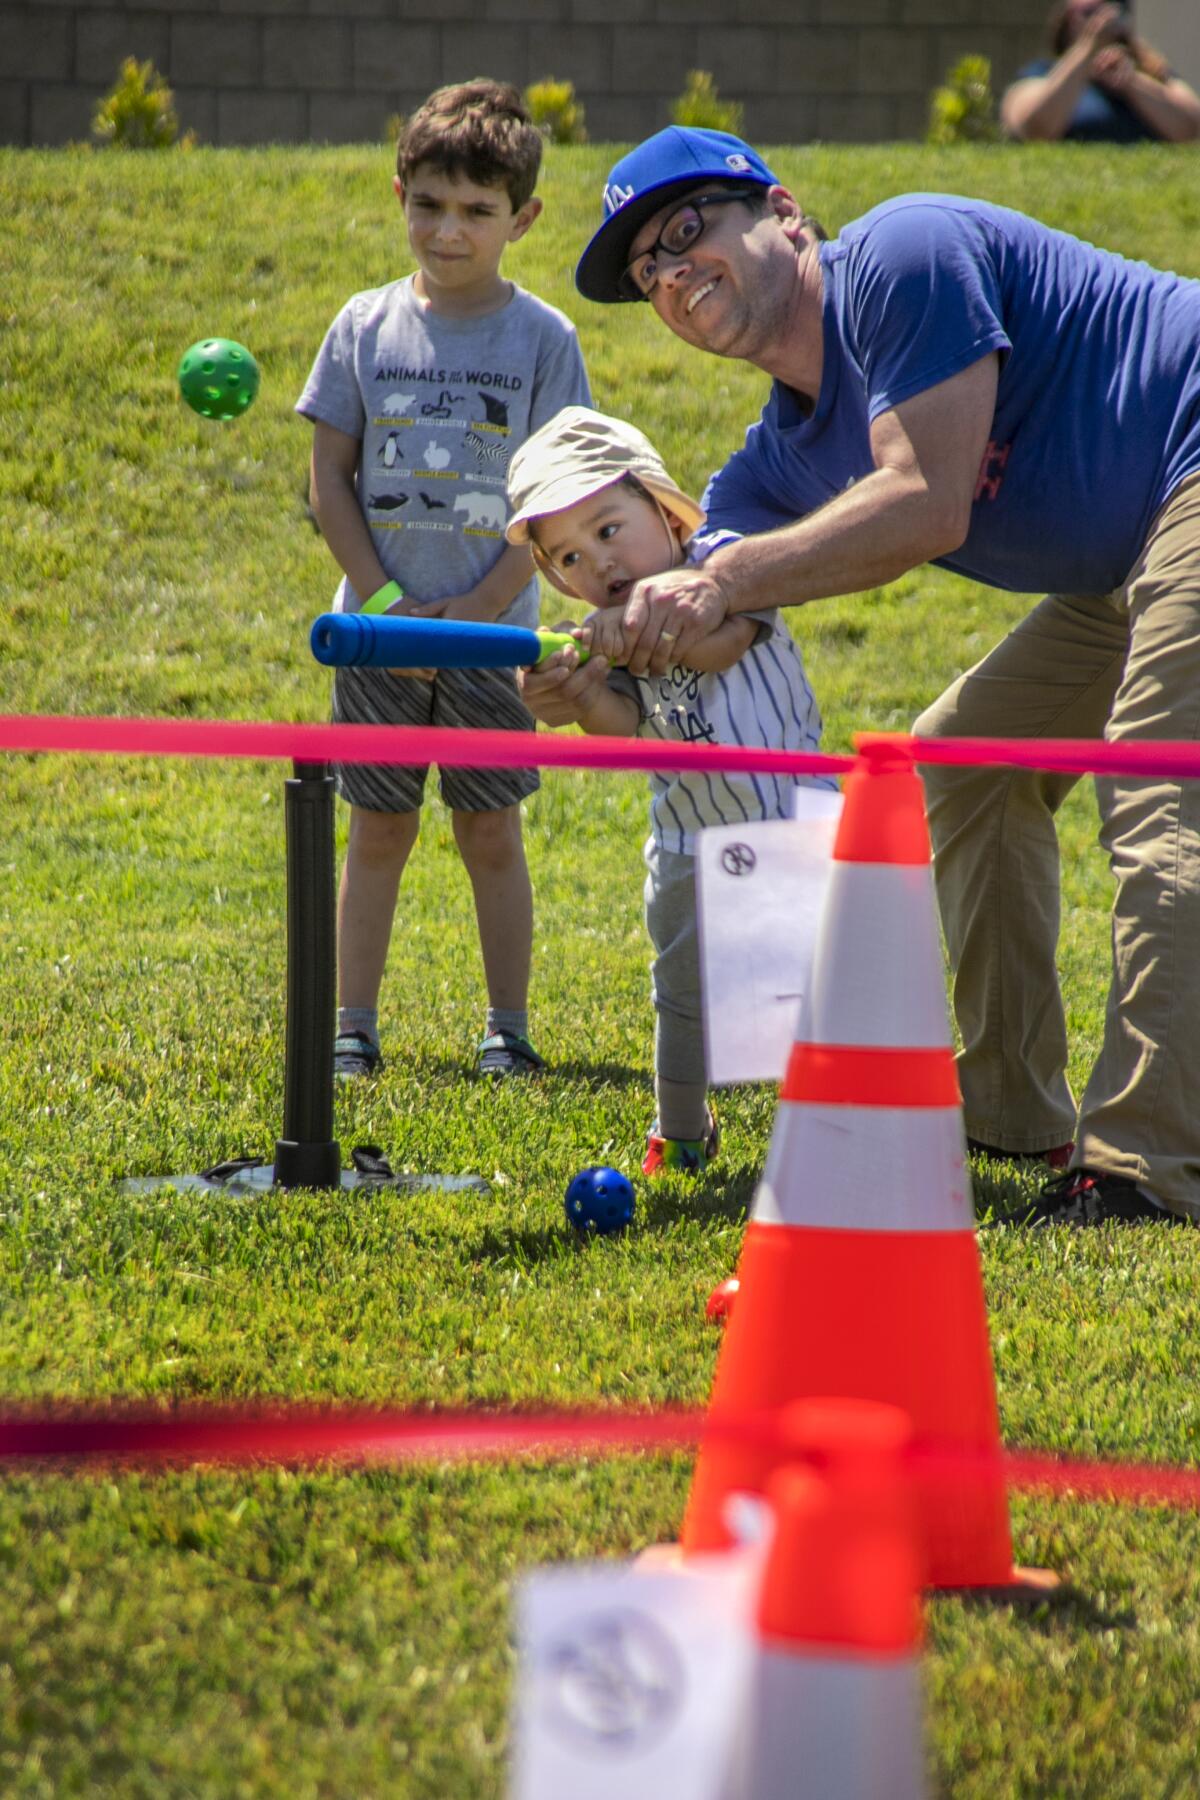 With dad Matthew helping and Jacob Hurwitz, 7, looking on, 2-year-old Martin Langer smacks a wiffle ball.